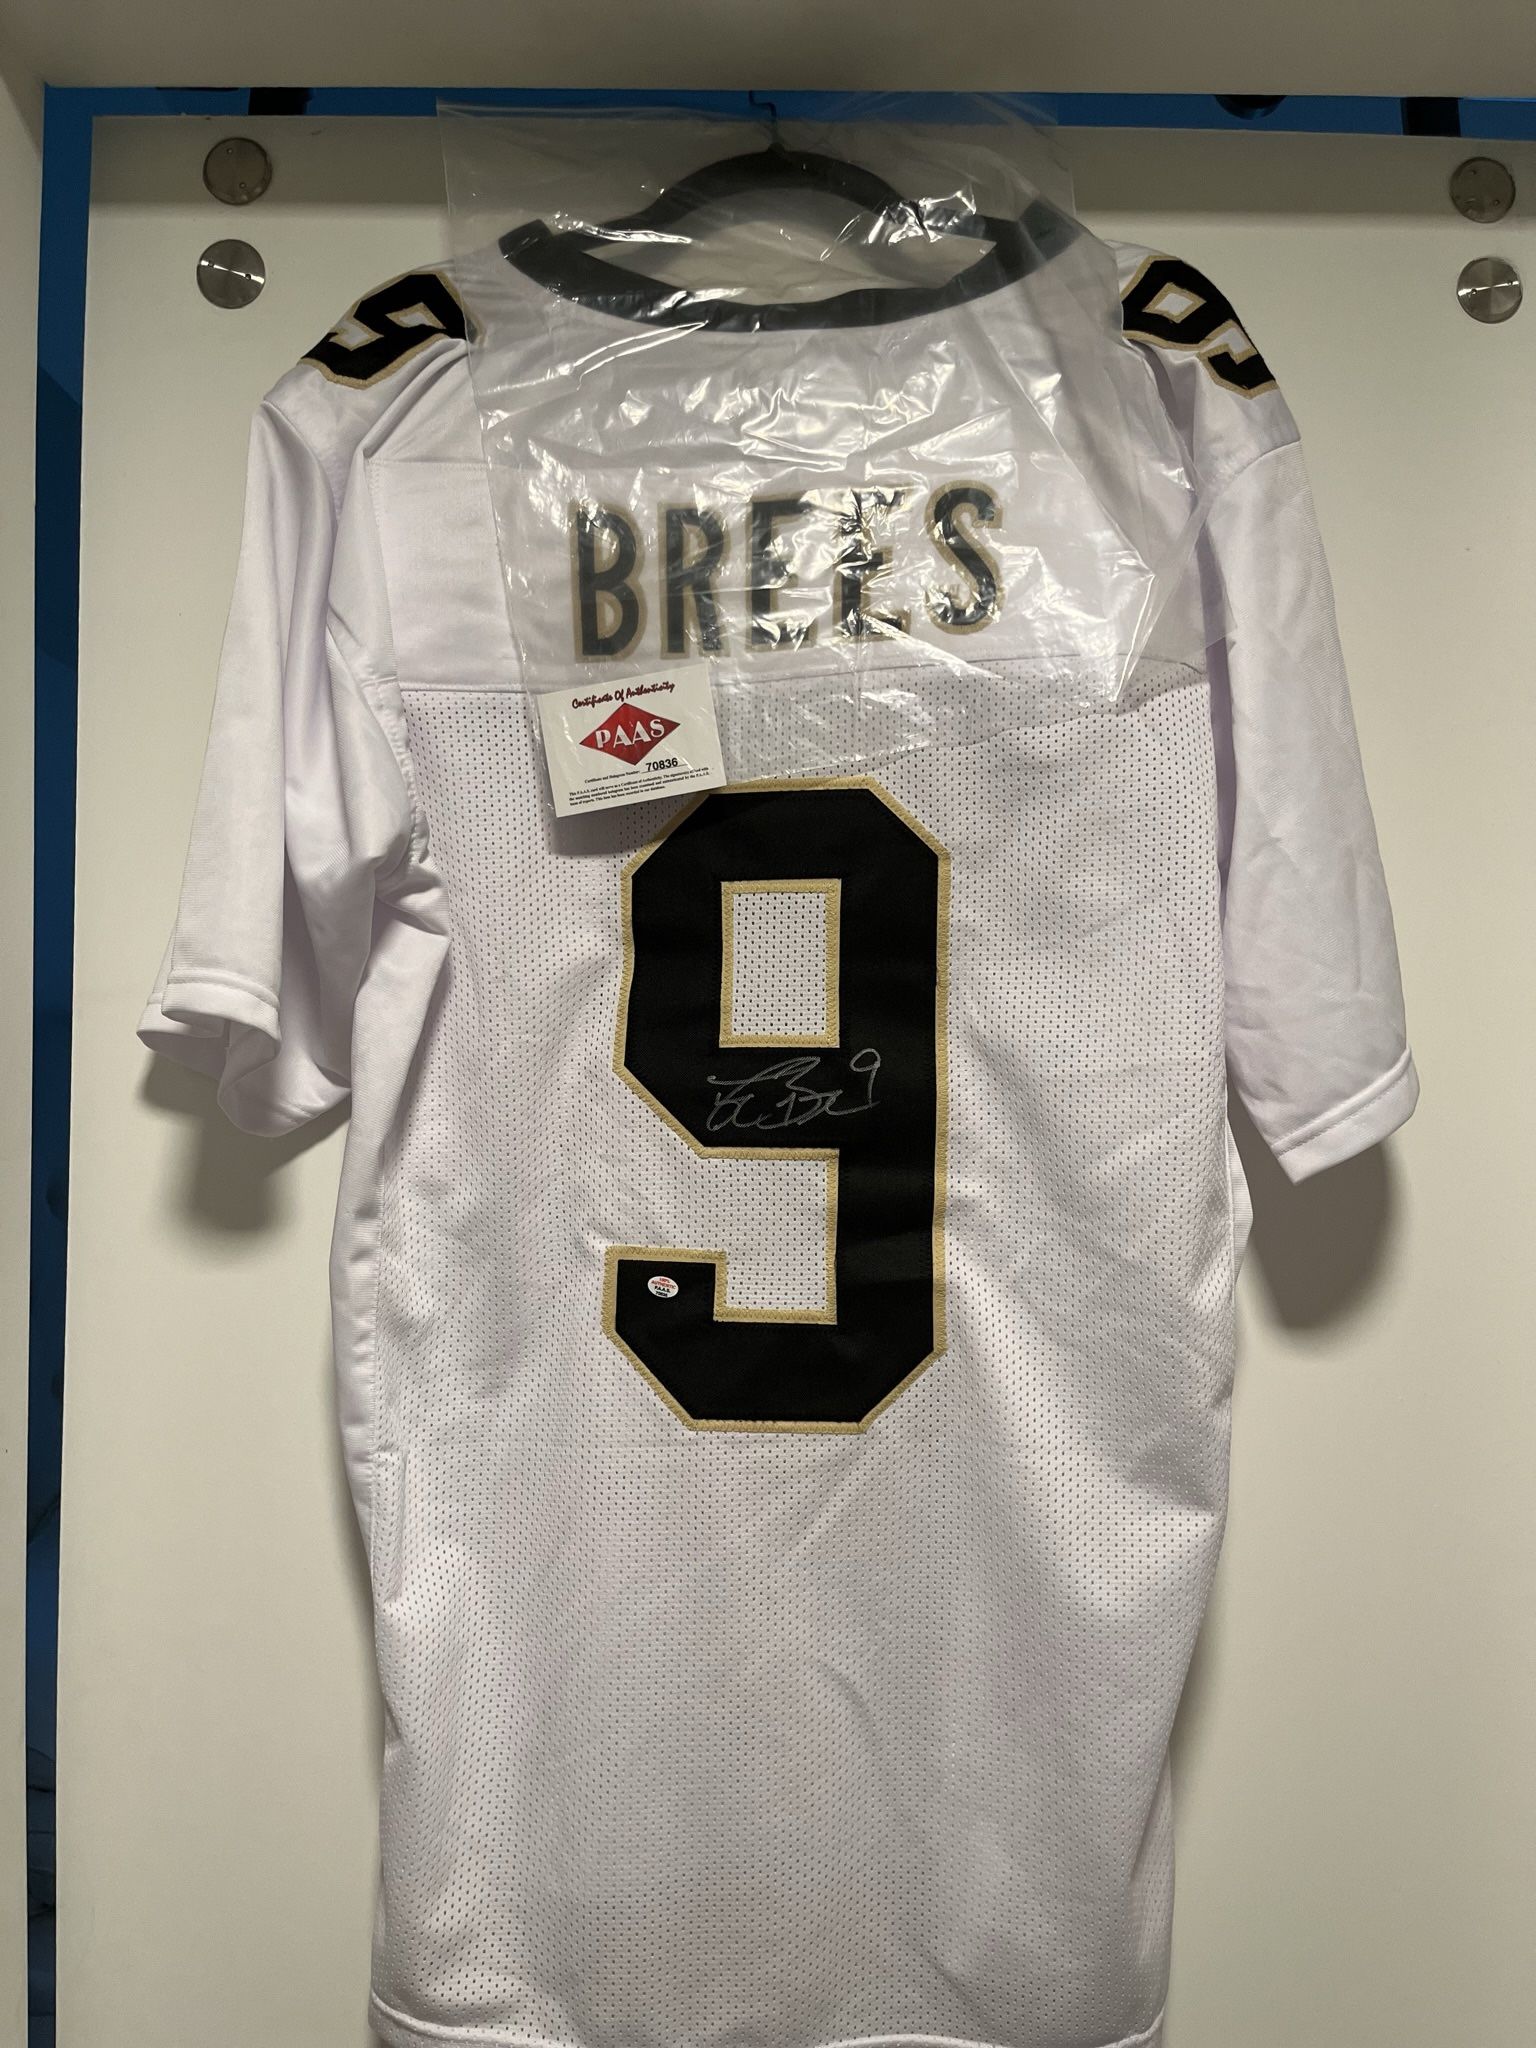 NFL Brees Signed New Orleans Jersey